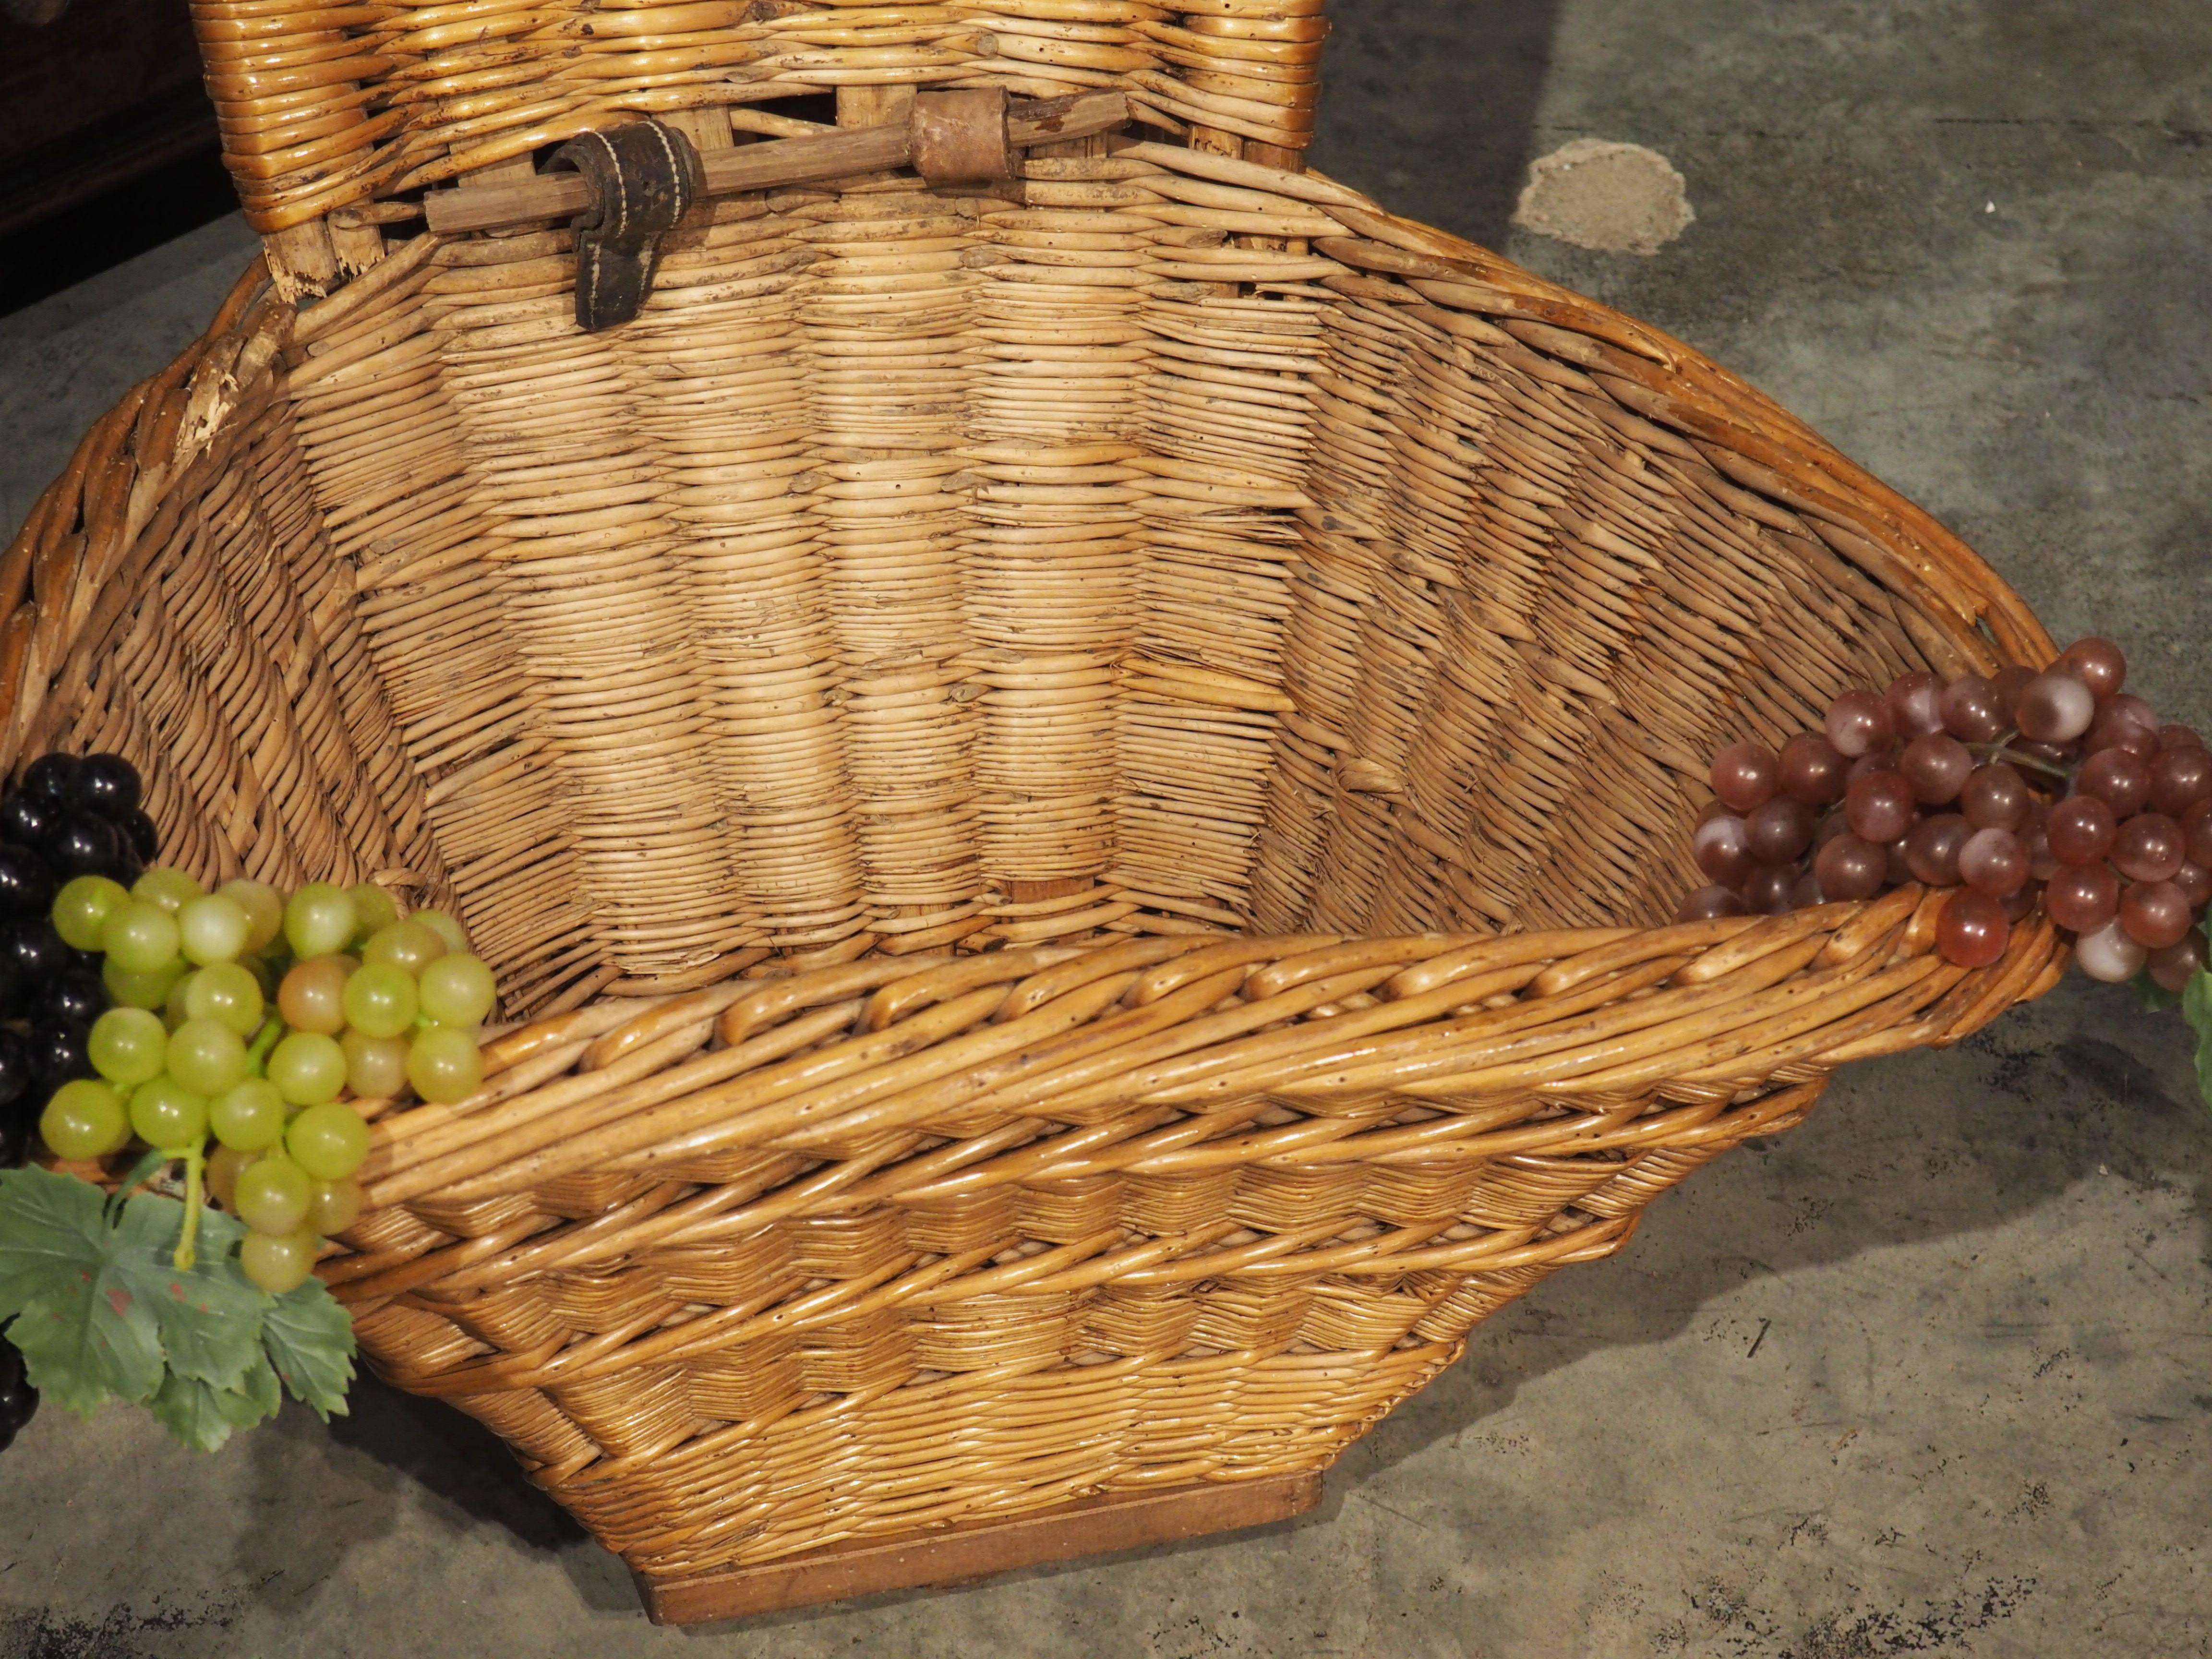 Hand-Woven Handwoven Wine Grape Harvesting Basket from Beaune France, circa 1890